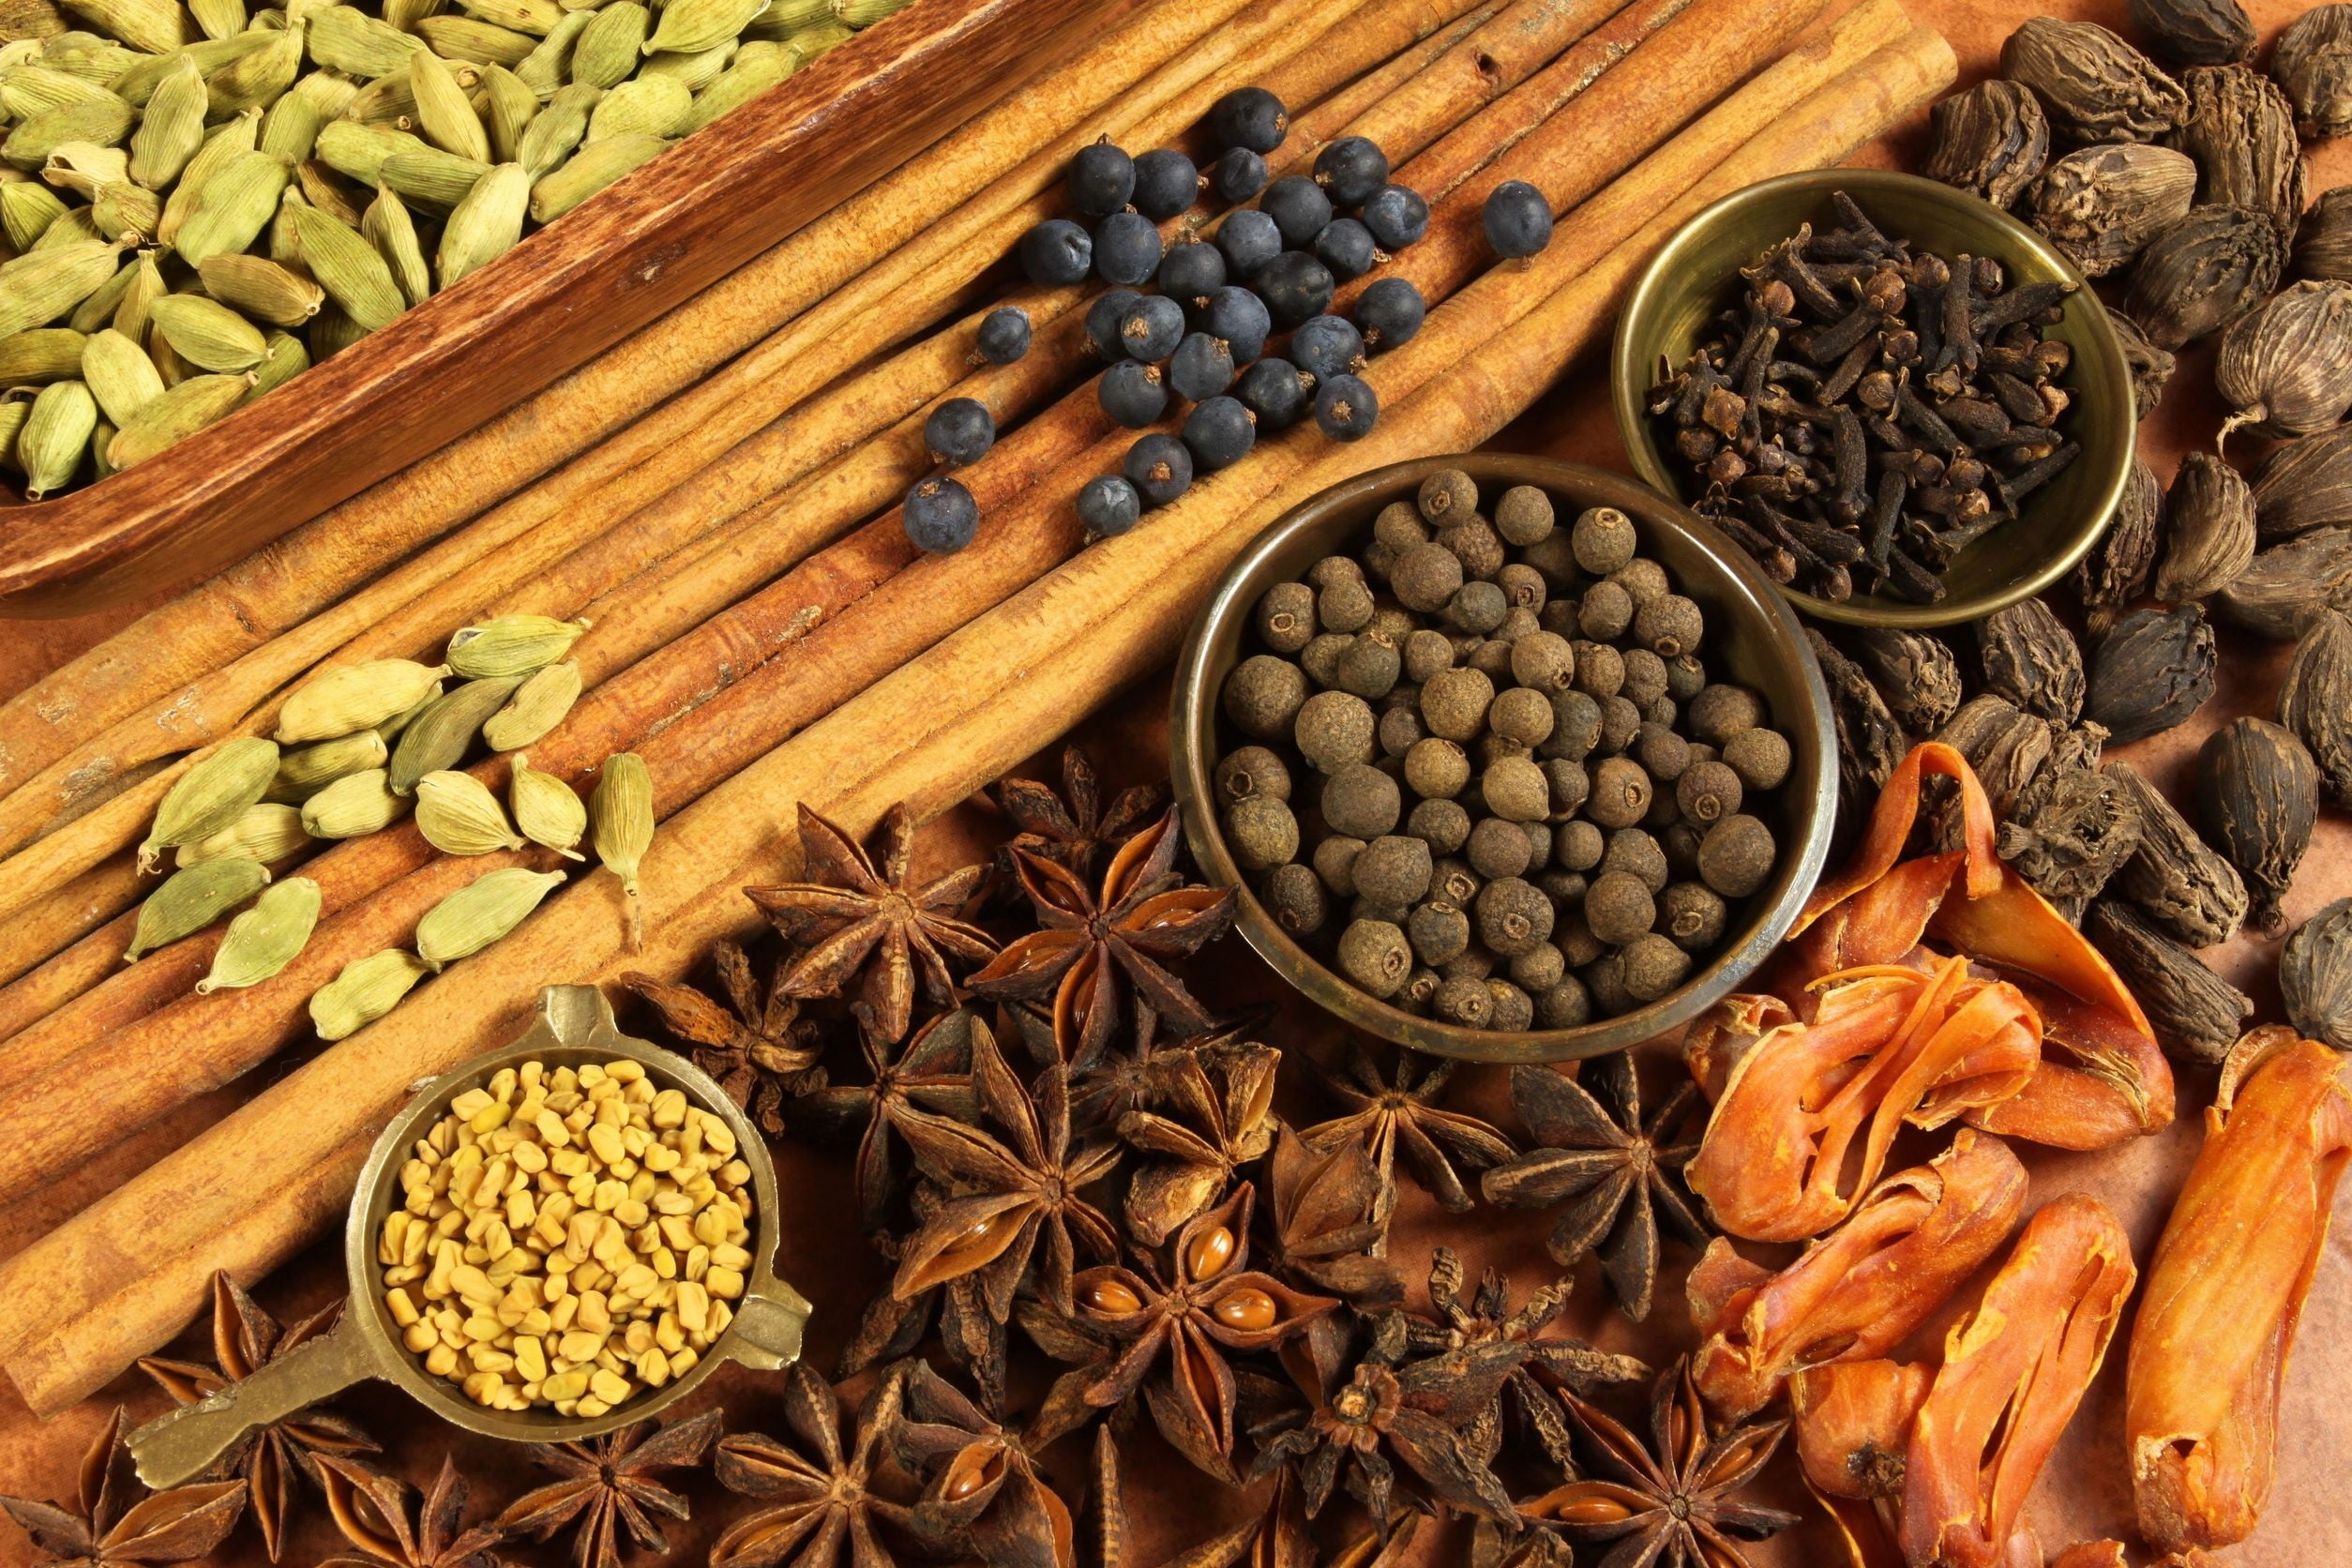 Assorted herbs and spices, HD wallpaper, Flavorful ingredients, Culinary essentials, 2510x1680 HD Desktop